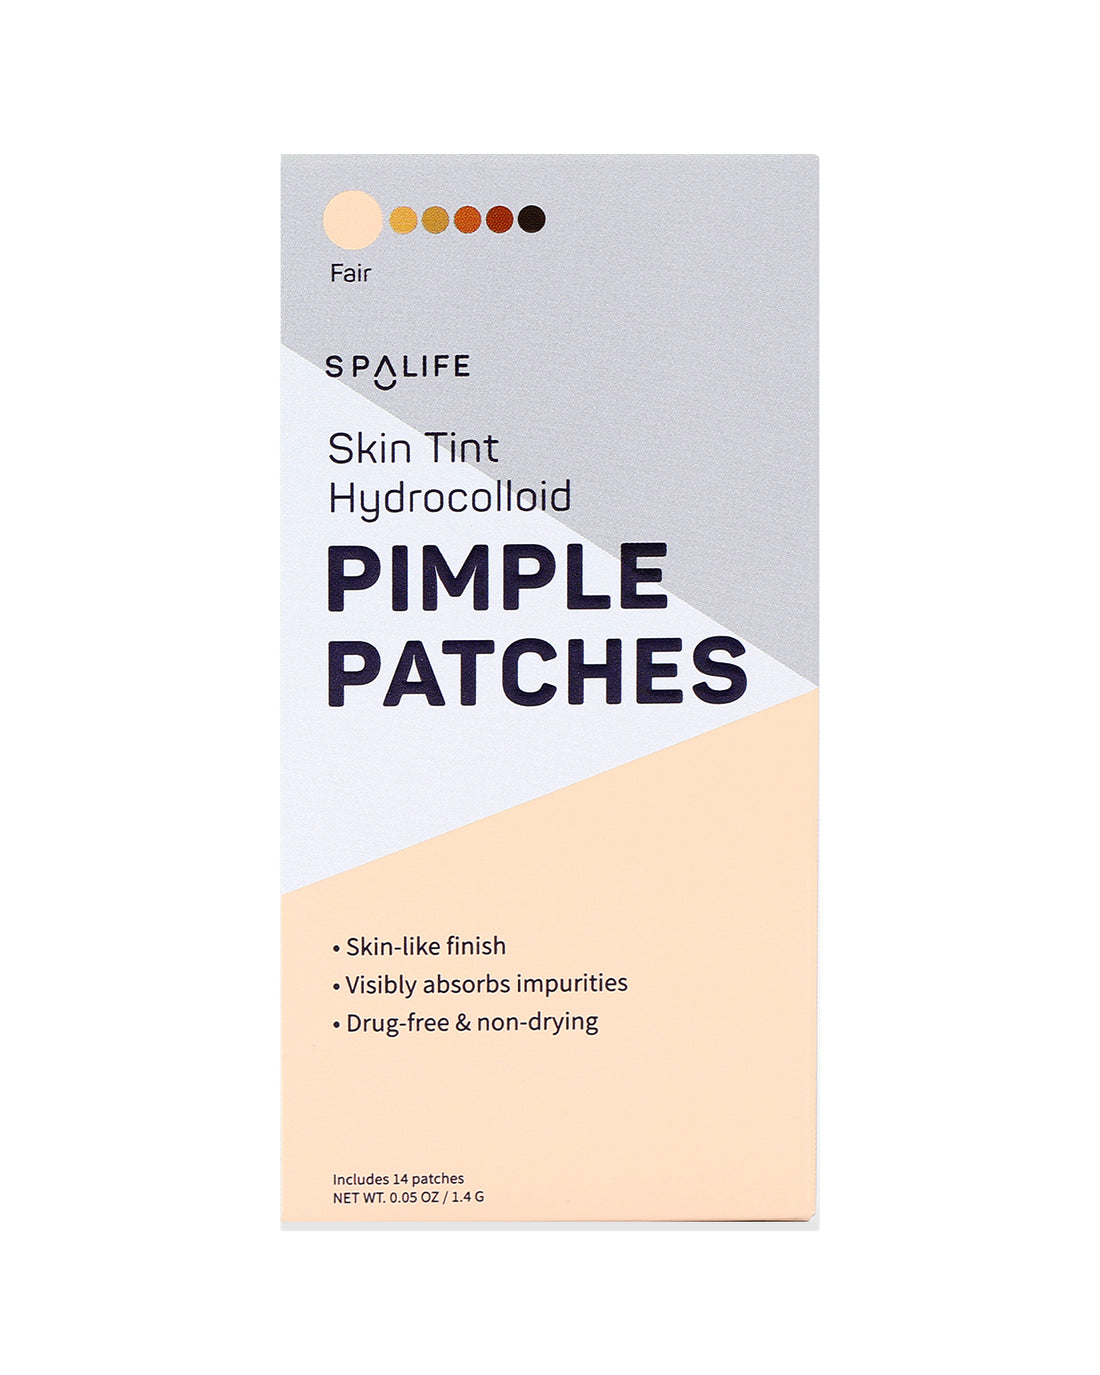 Skin_tint_pimple_patches_packe-366